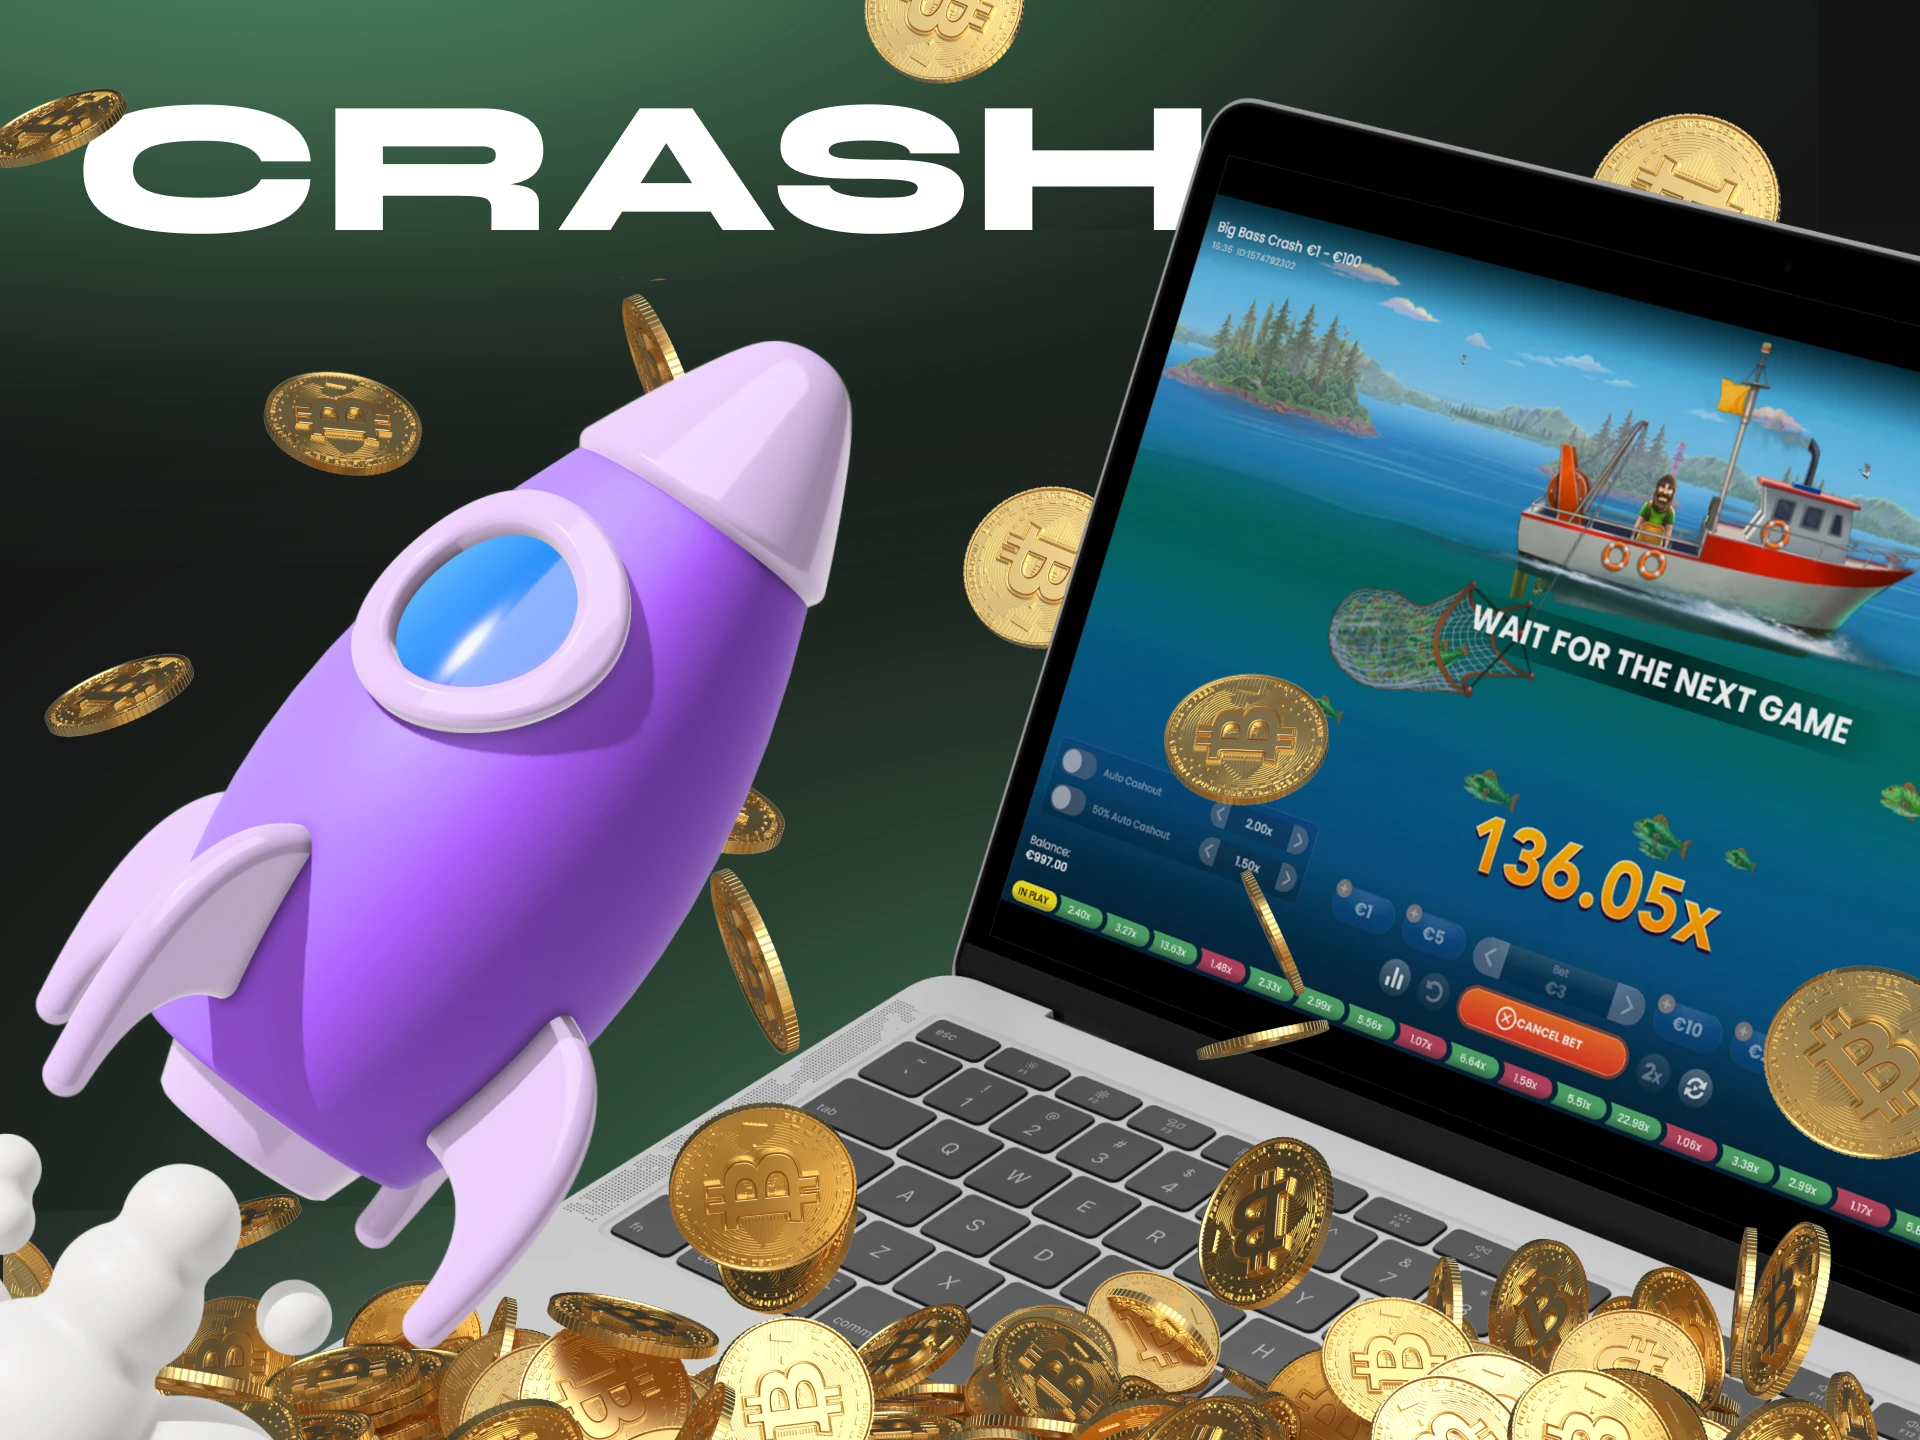 Try your luck in Crash games at crypto casinos.